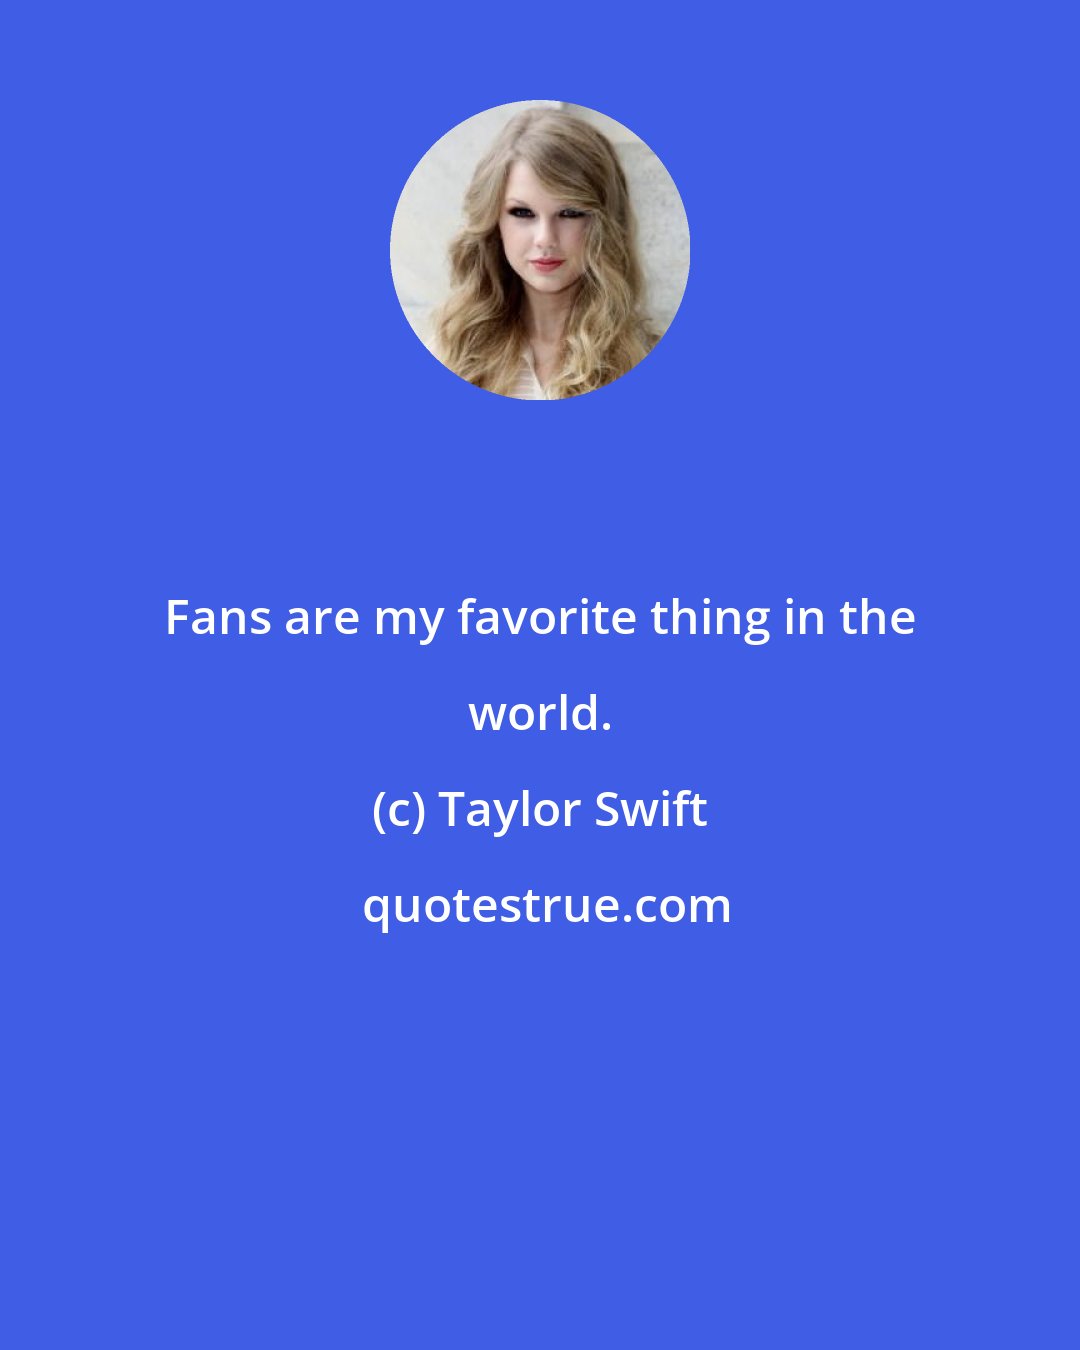 Taylor Swift: Fans are my favorite thing in the world.